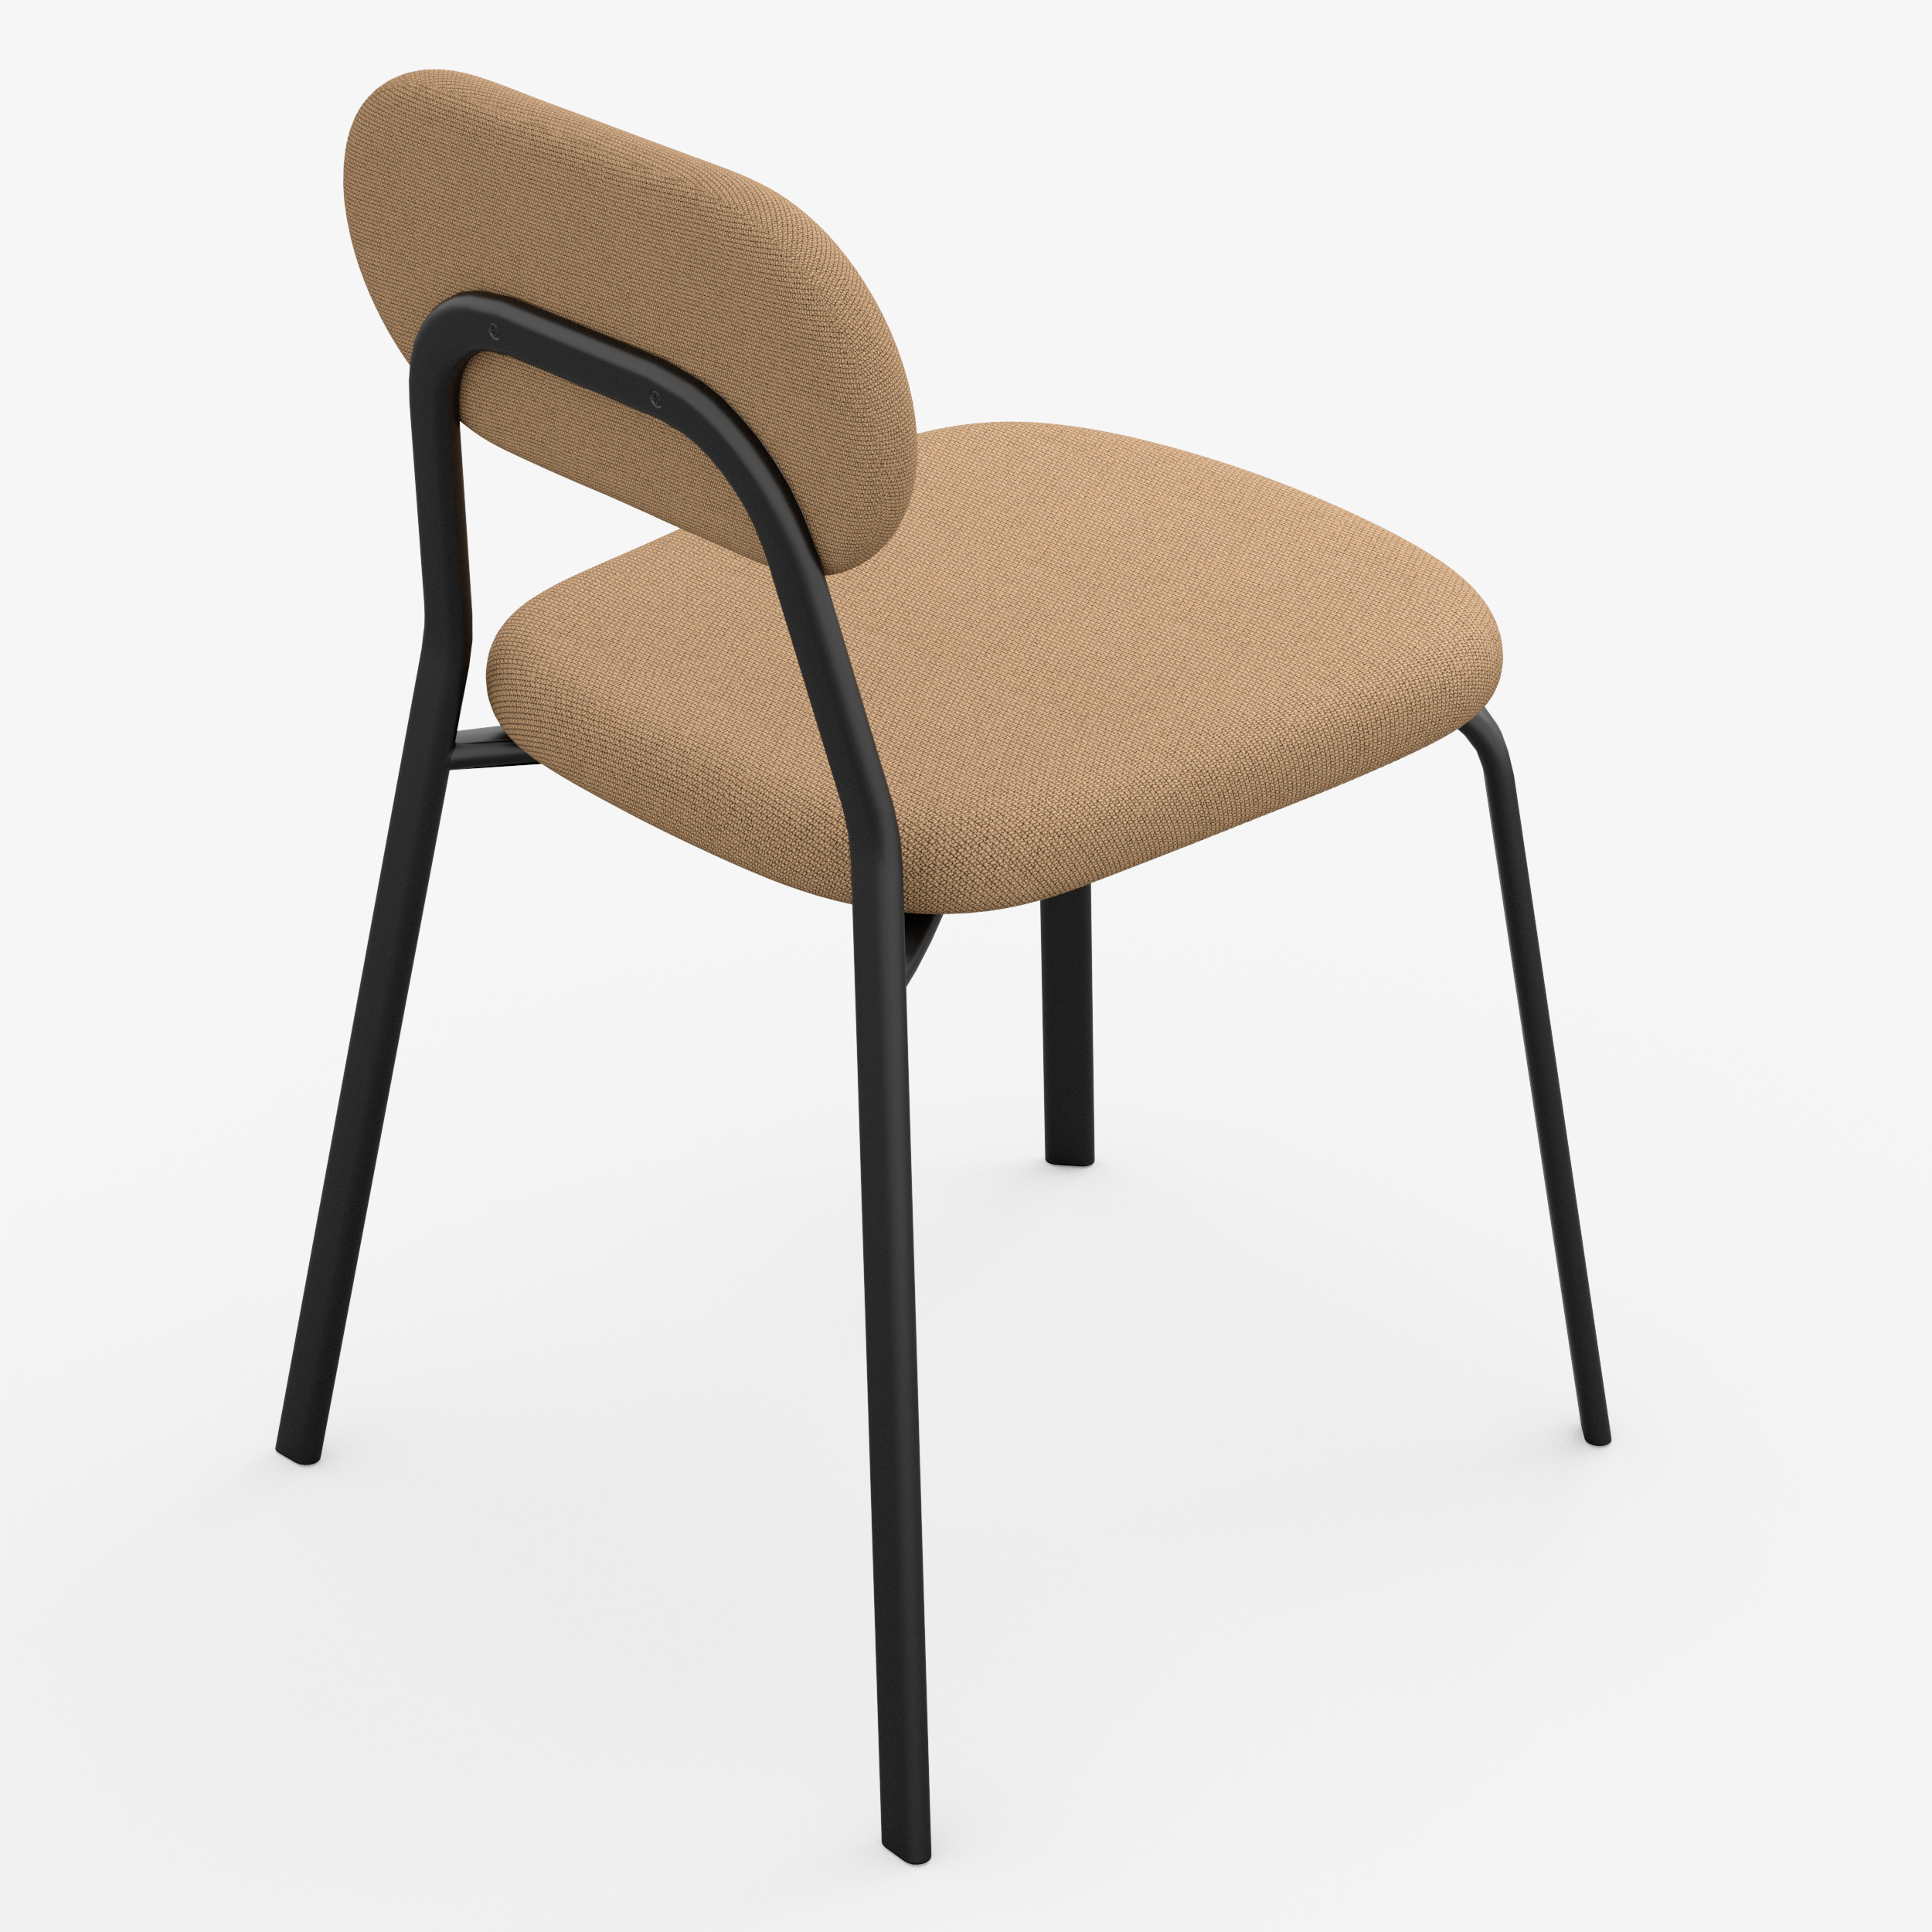 Form - Chair (Oval, Persian Orange)